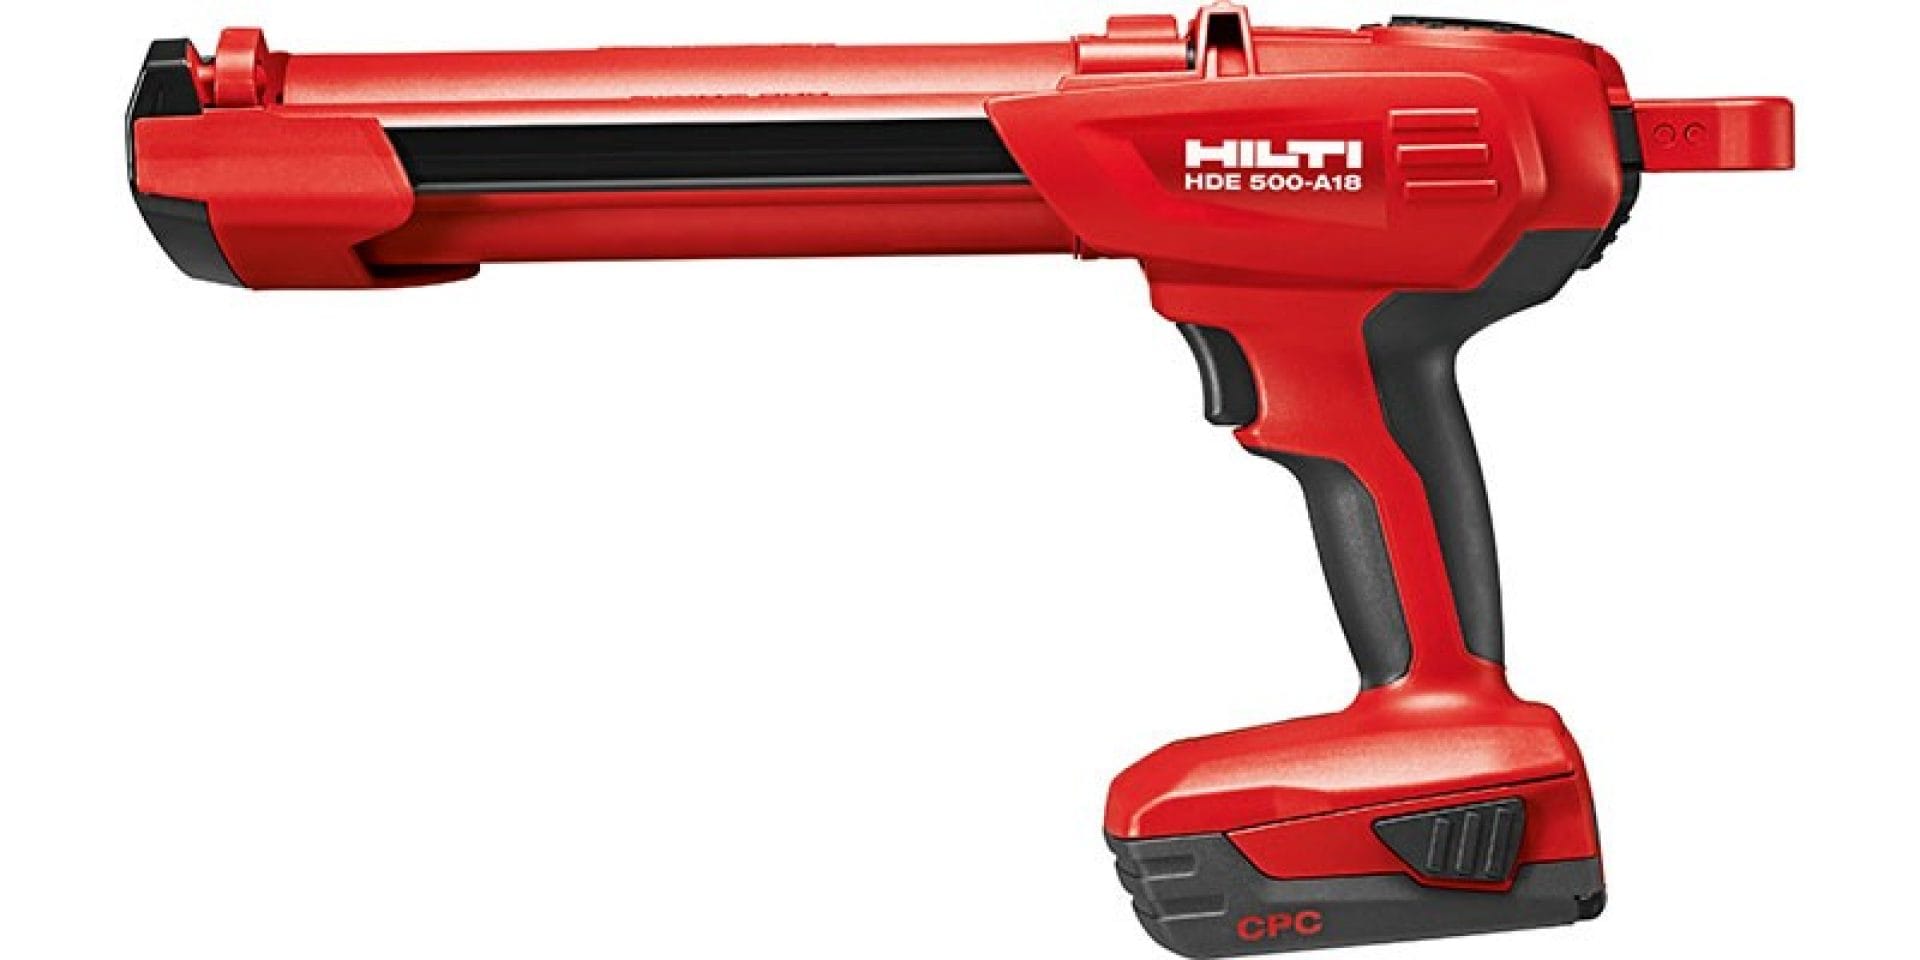 HDE 500-A12 cordless battery dispenser as part of the Hilti SafeSet system